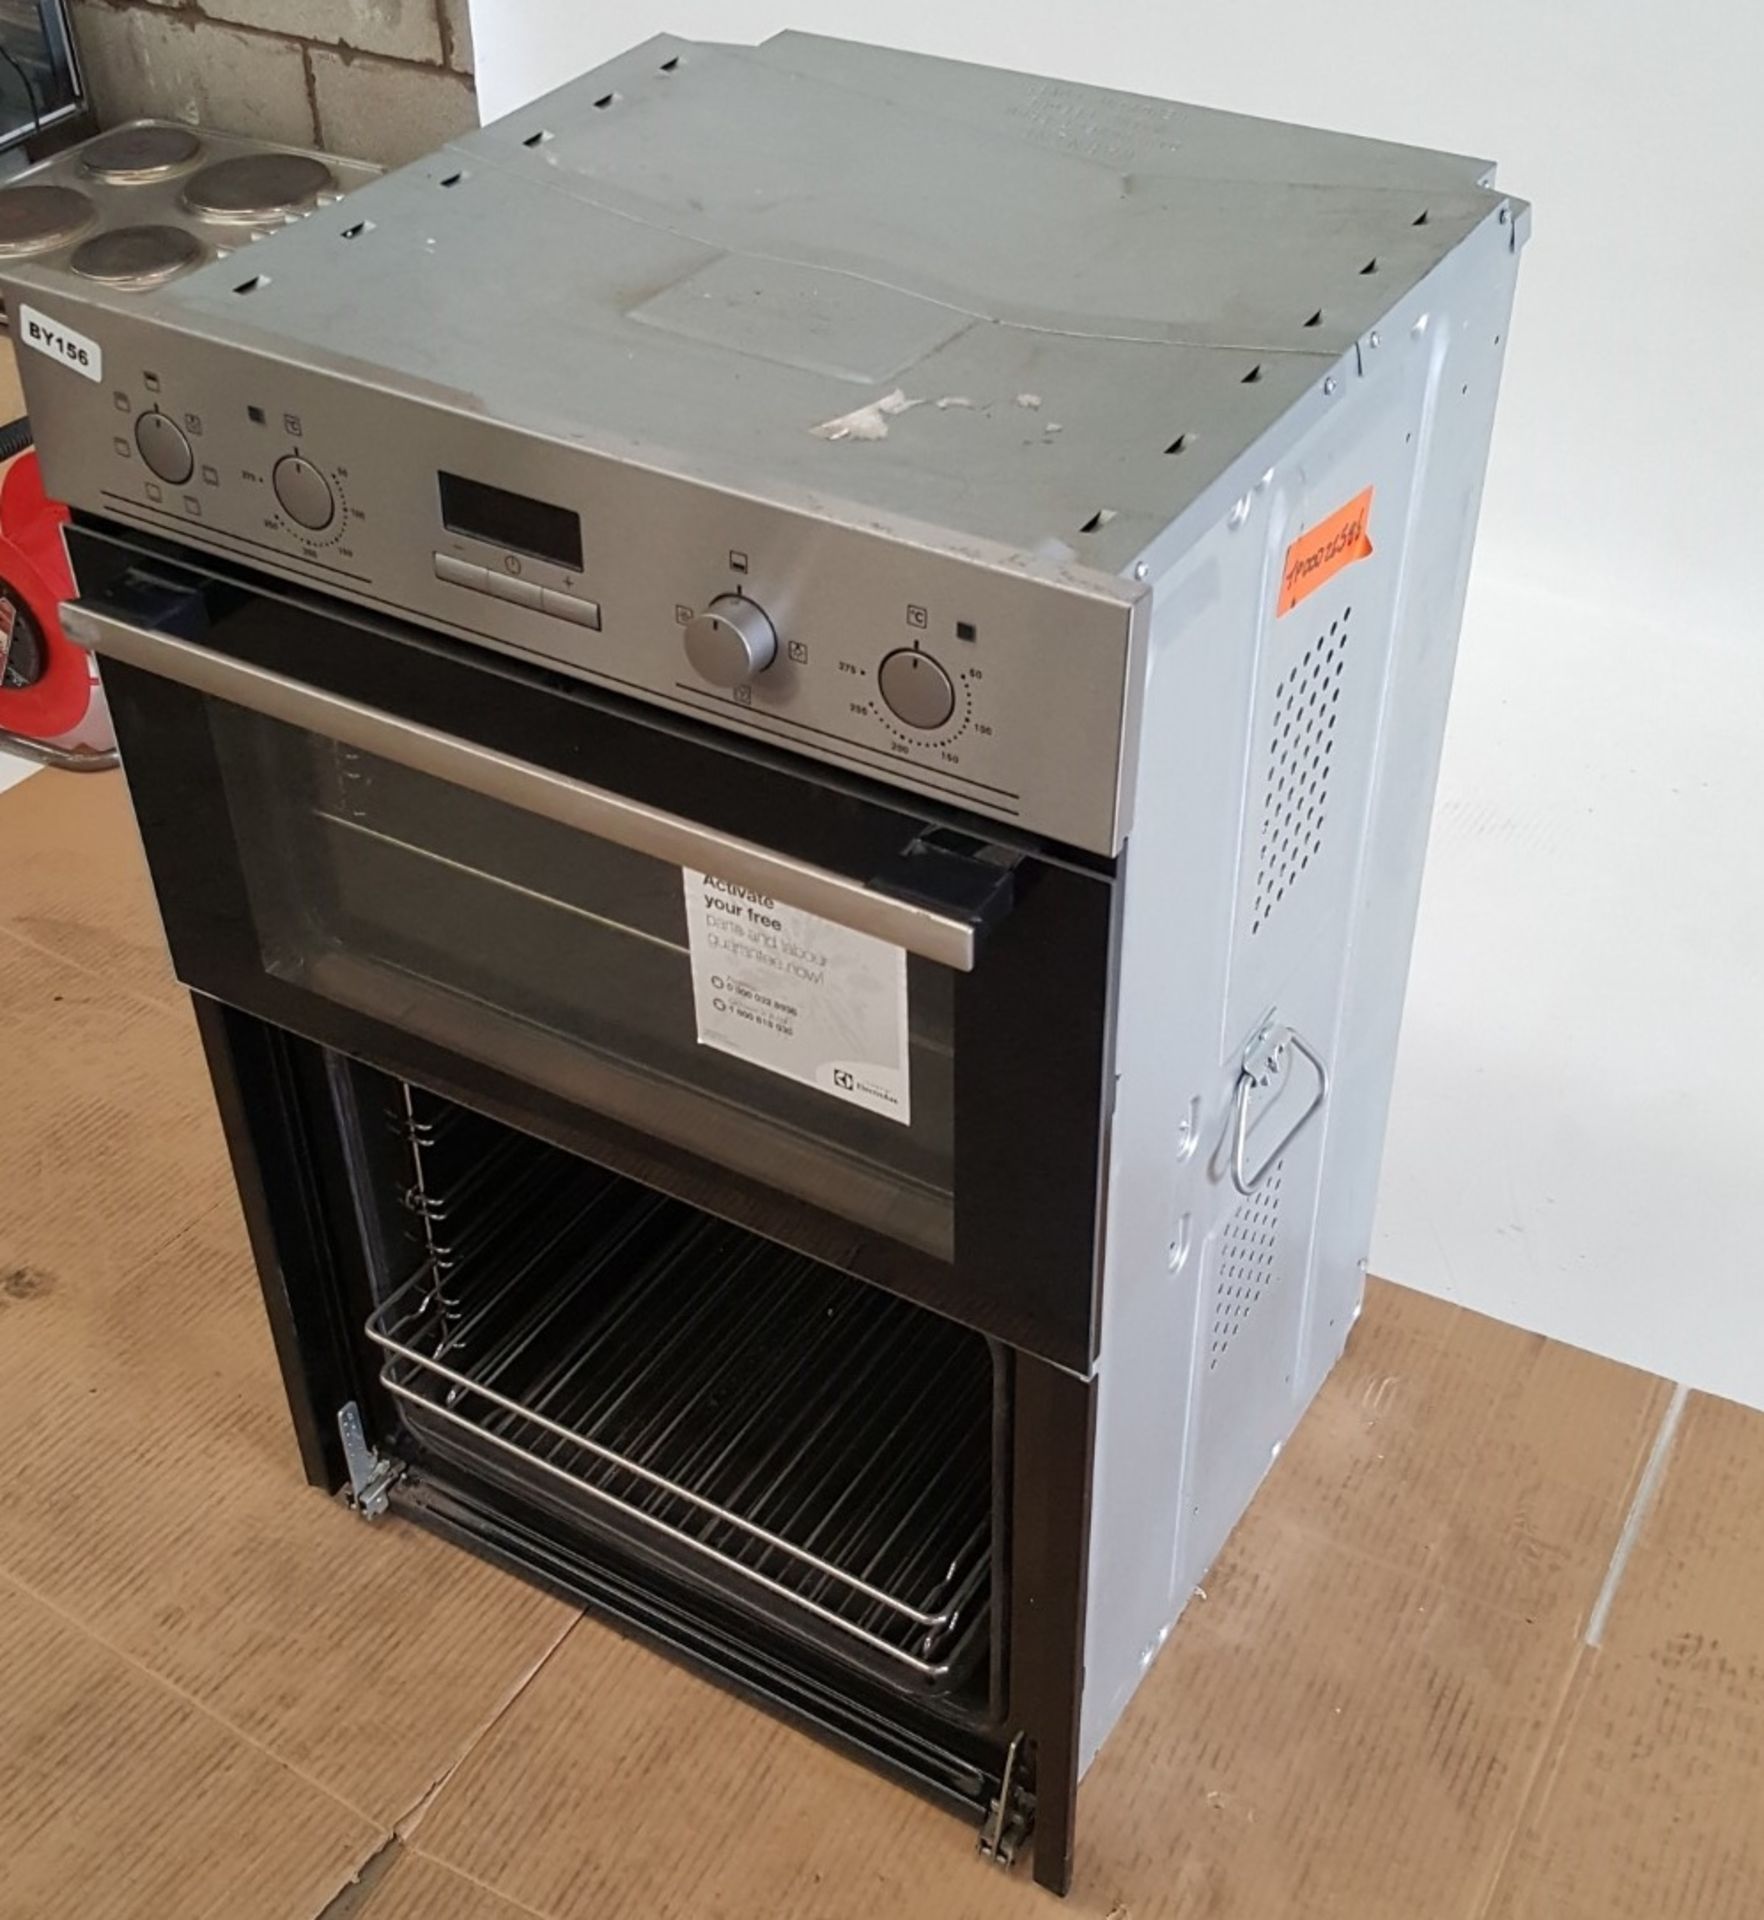 1 x Electrolux EOD3410AOX Built In Double Electric Oven Stainless Steel - Ref BY156 - Image 4 of 6